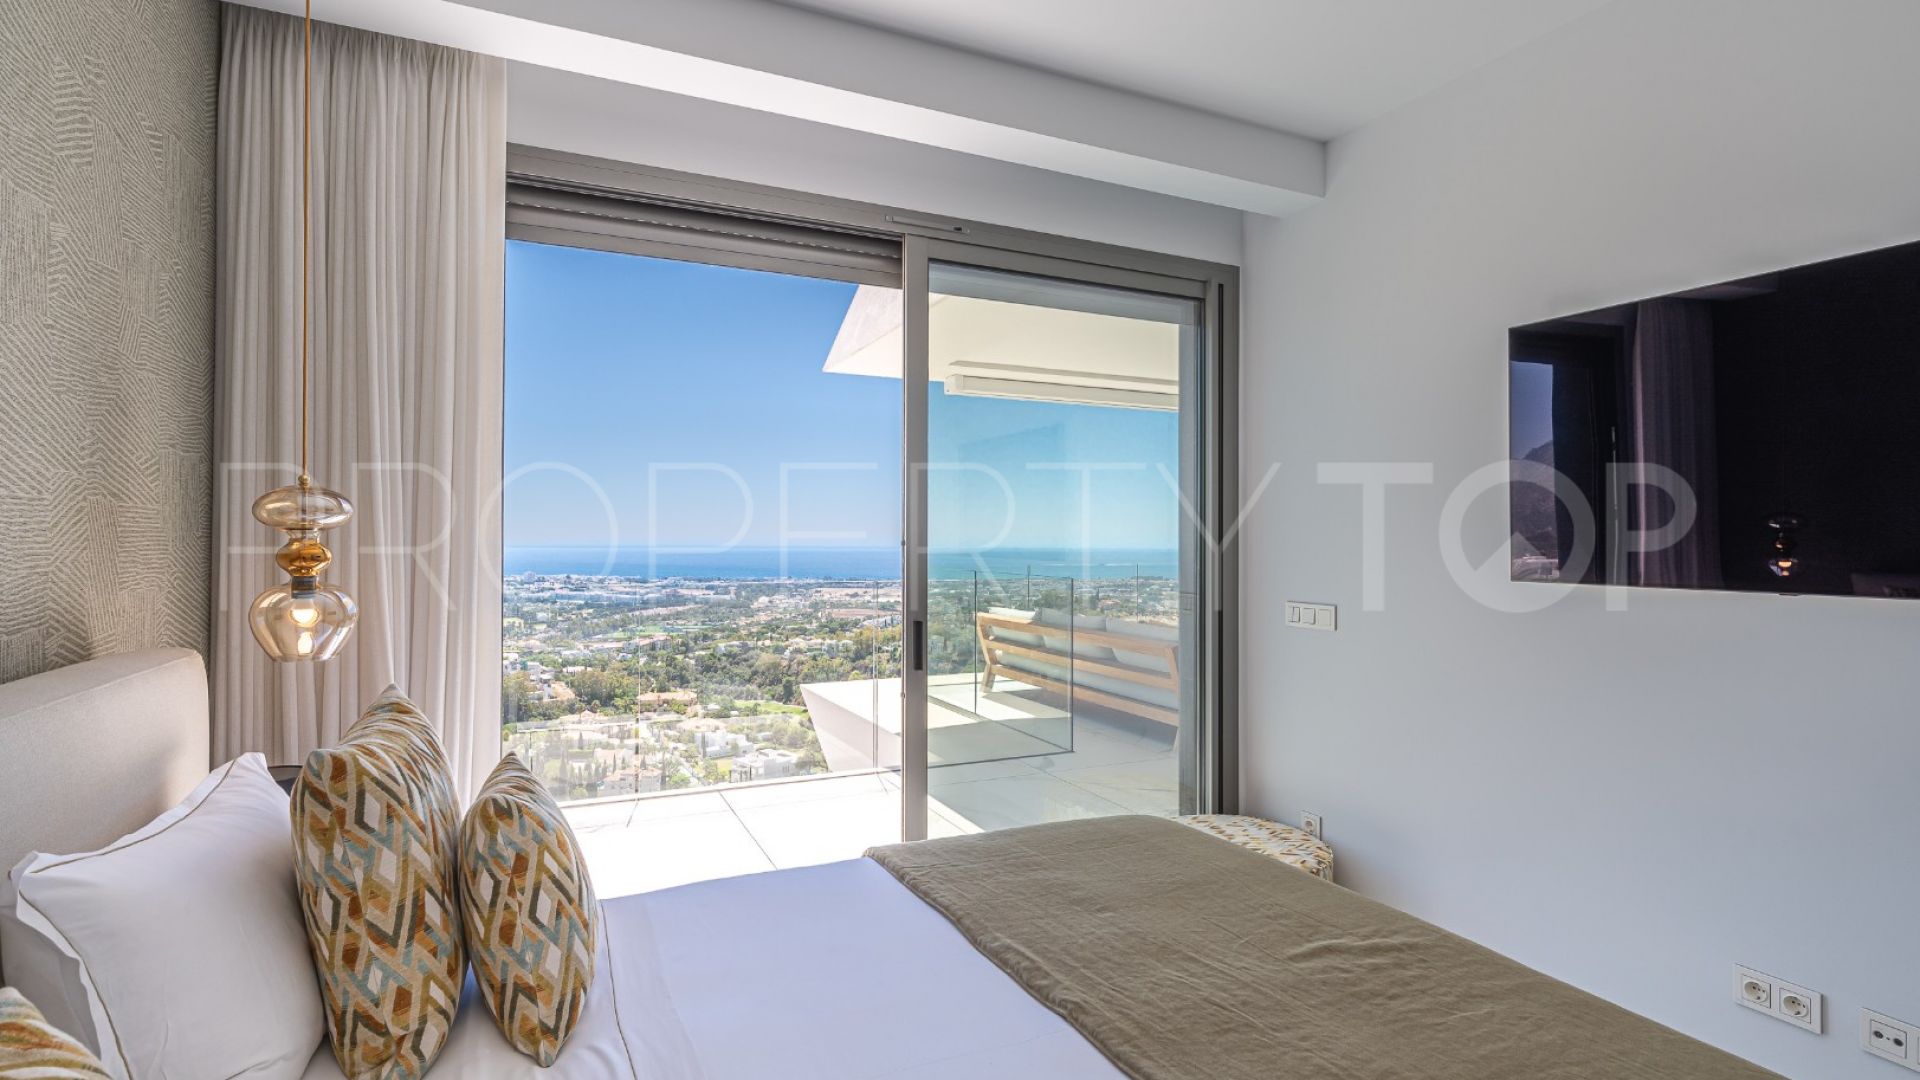 3 bedrooms Byu Hills apartment for sale